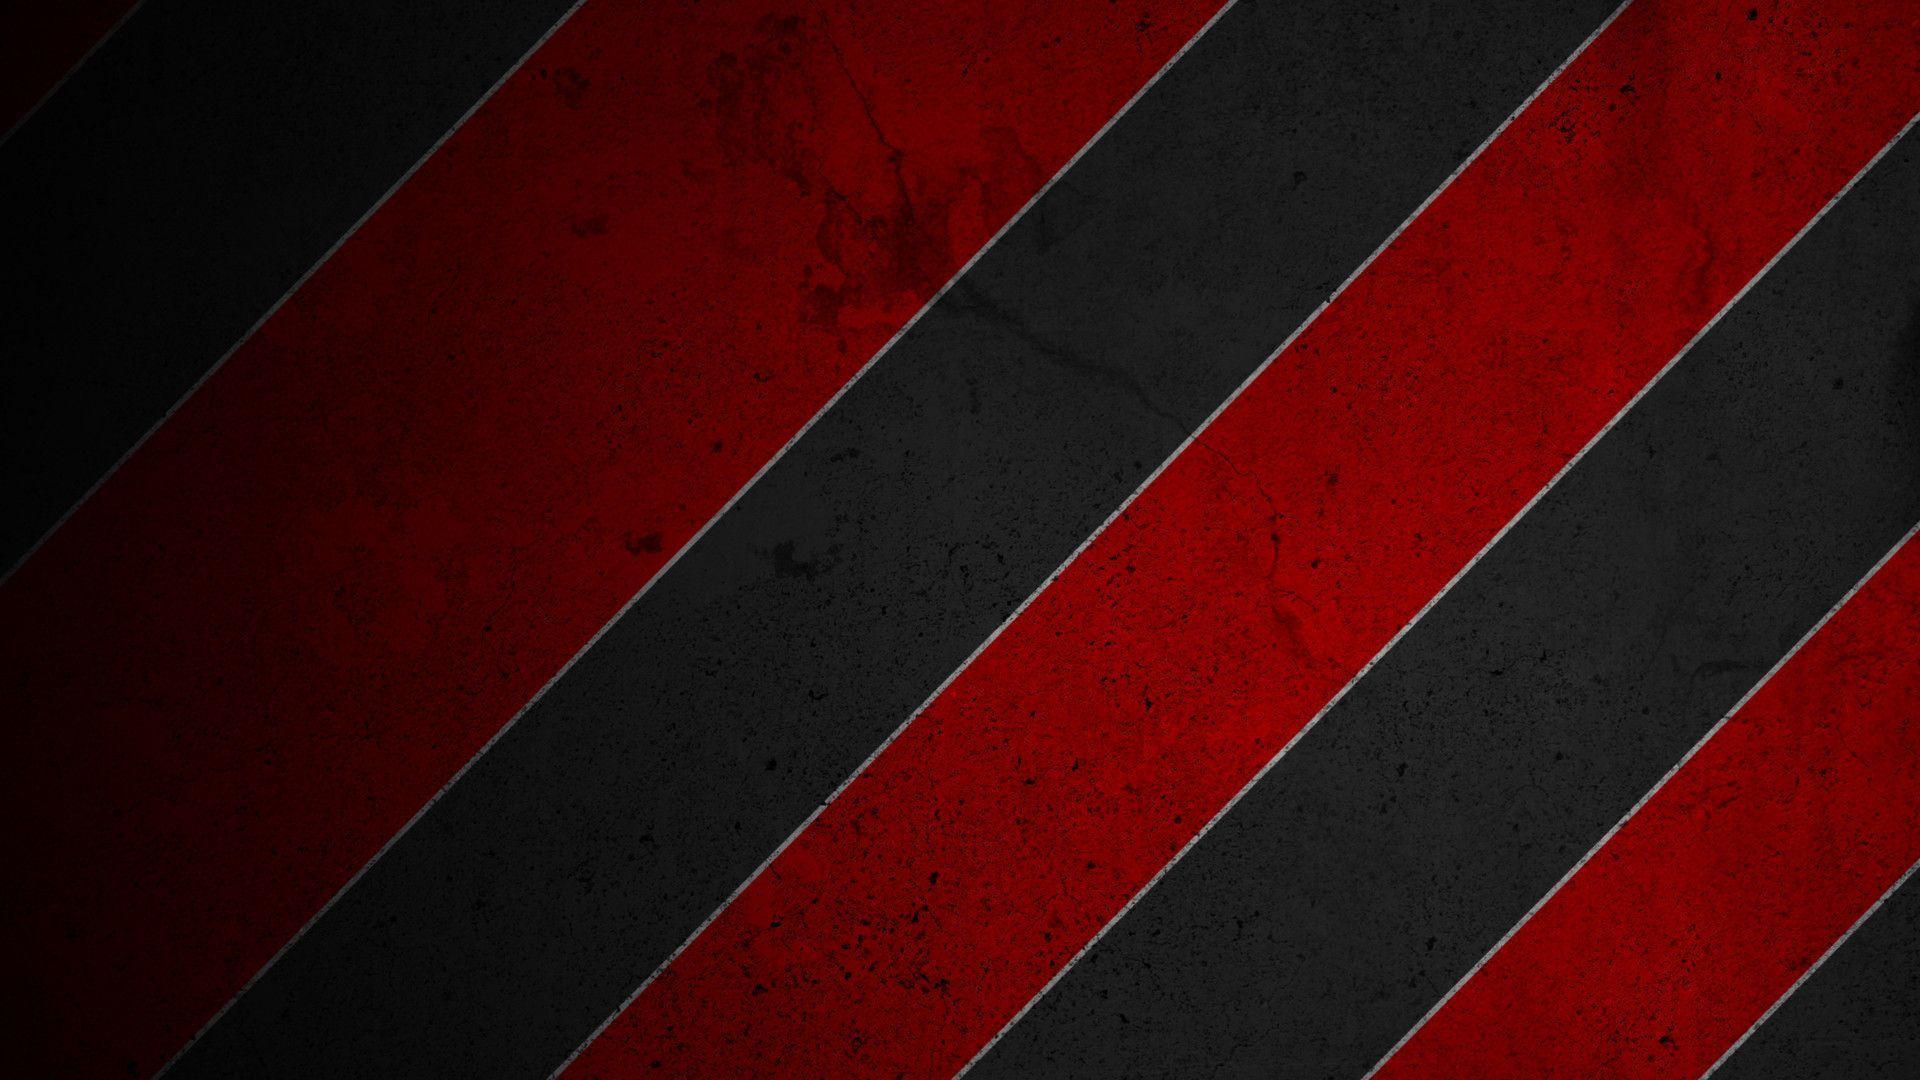 Red Wallpaper and Background